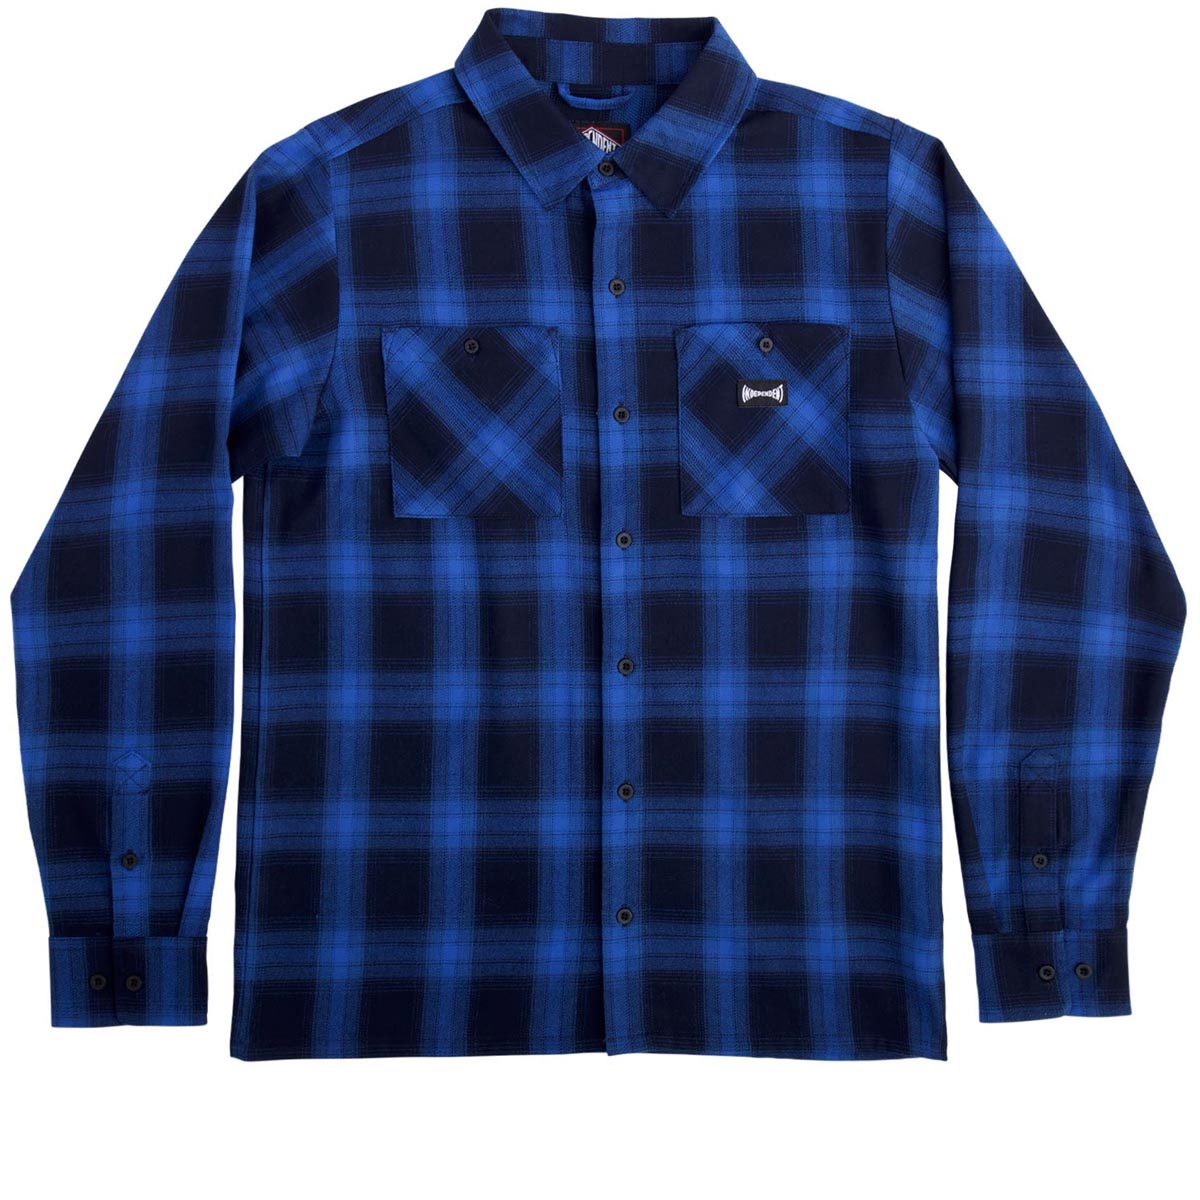 Independent Legacy Flannel Long Sleeve Shirt - Blue image 1